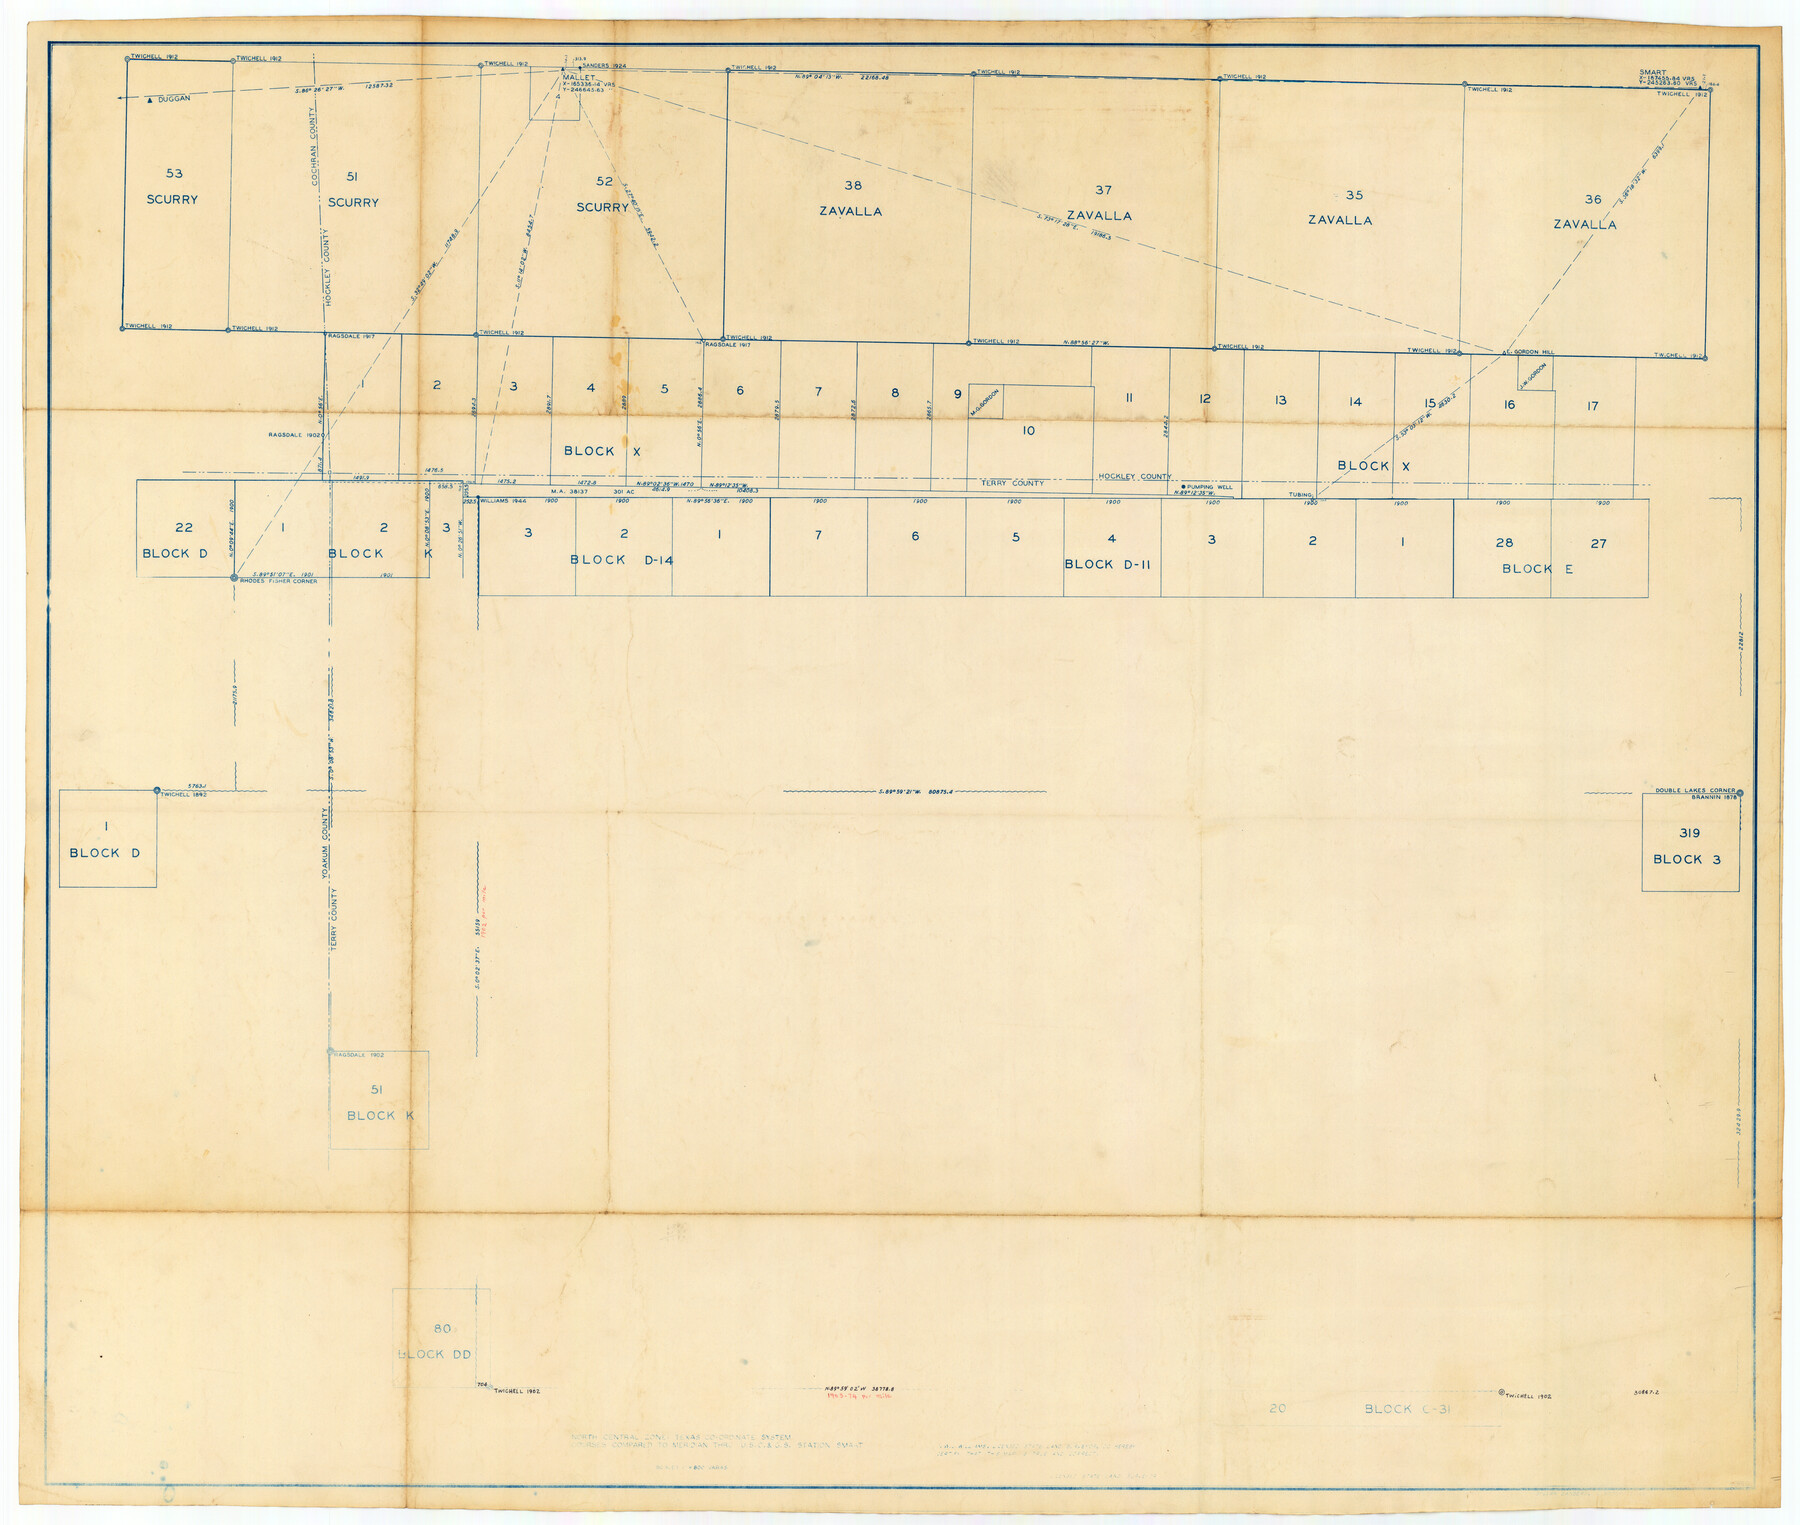 89883, Sketch showing parts of Terry, Yoakum, Hockley, Cochran Counties, Twichell Survey Records